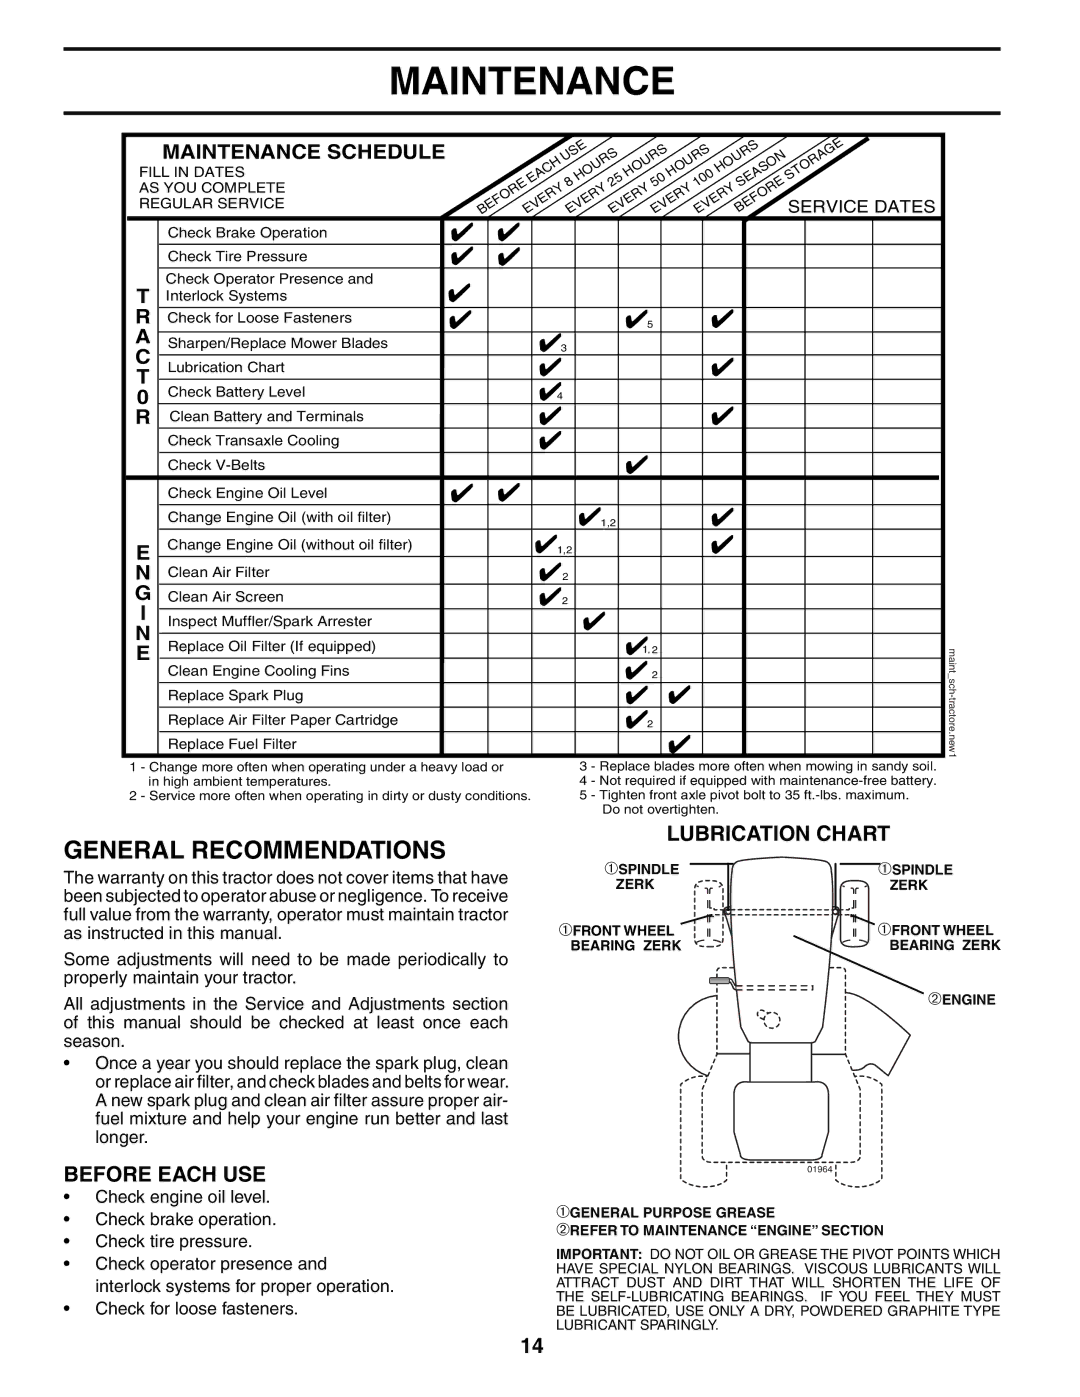 Poulan 187007 manual Maintenance, General Recommendations, Lubrication Chart, Before Each USE 